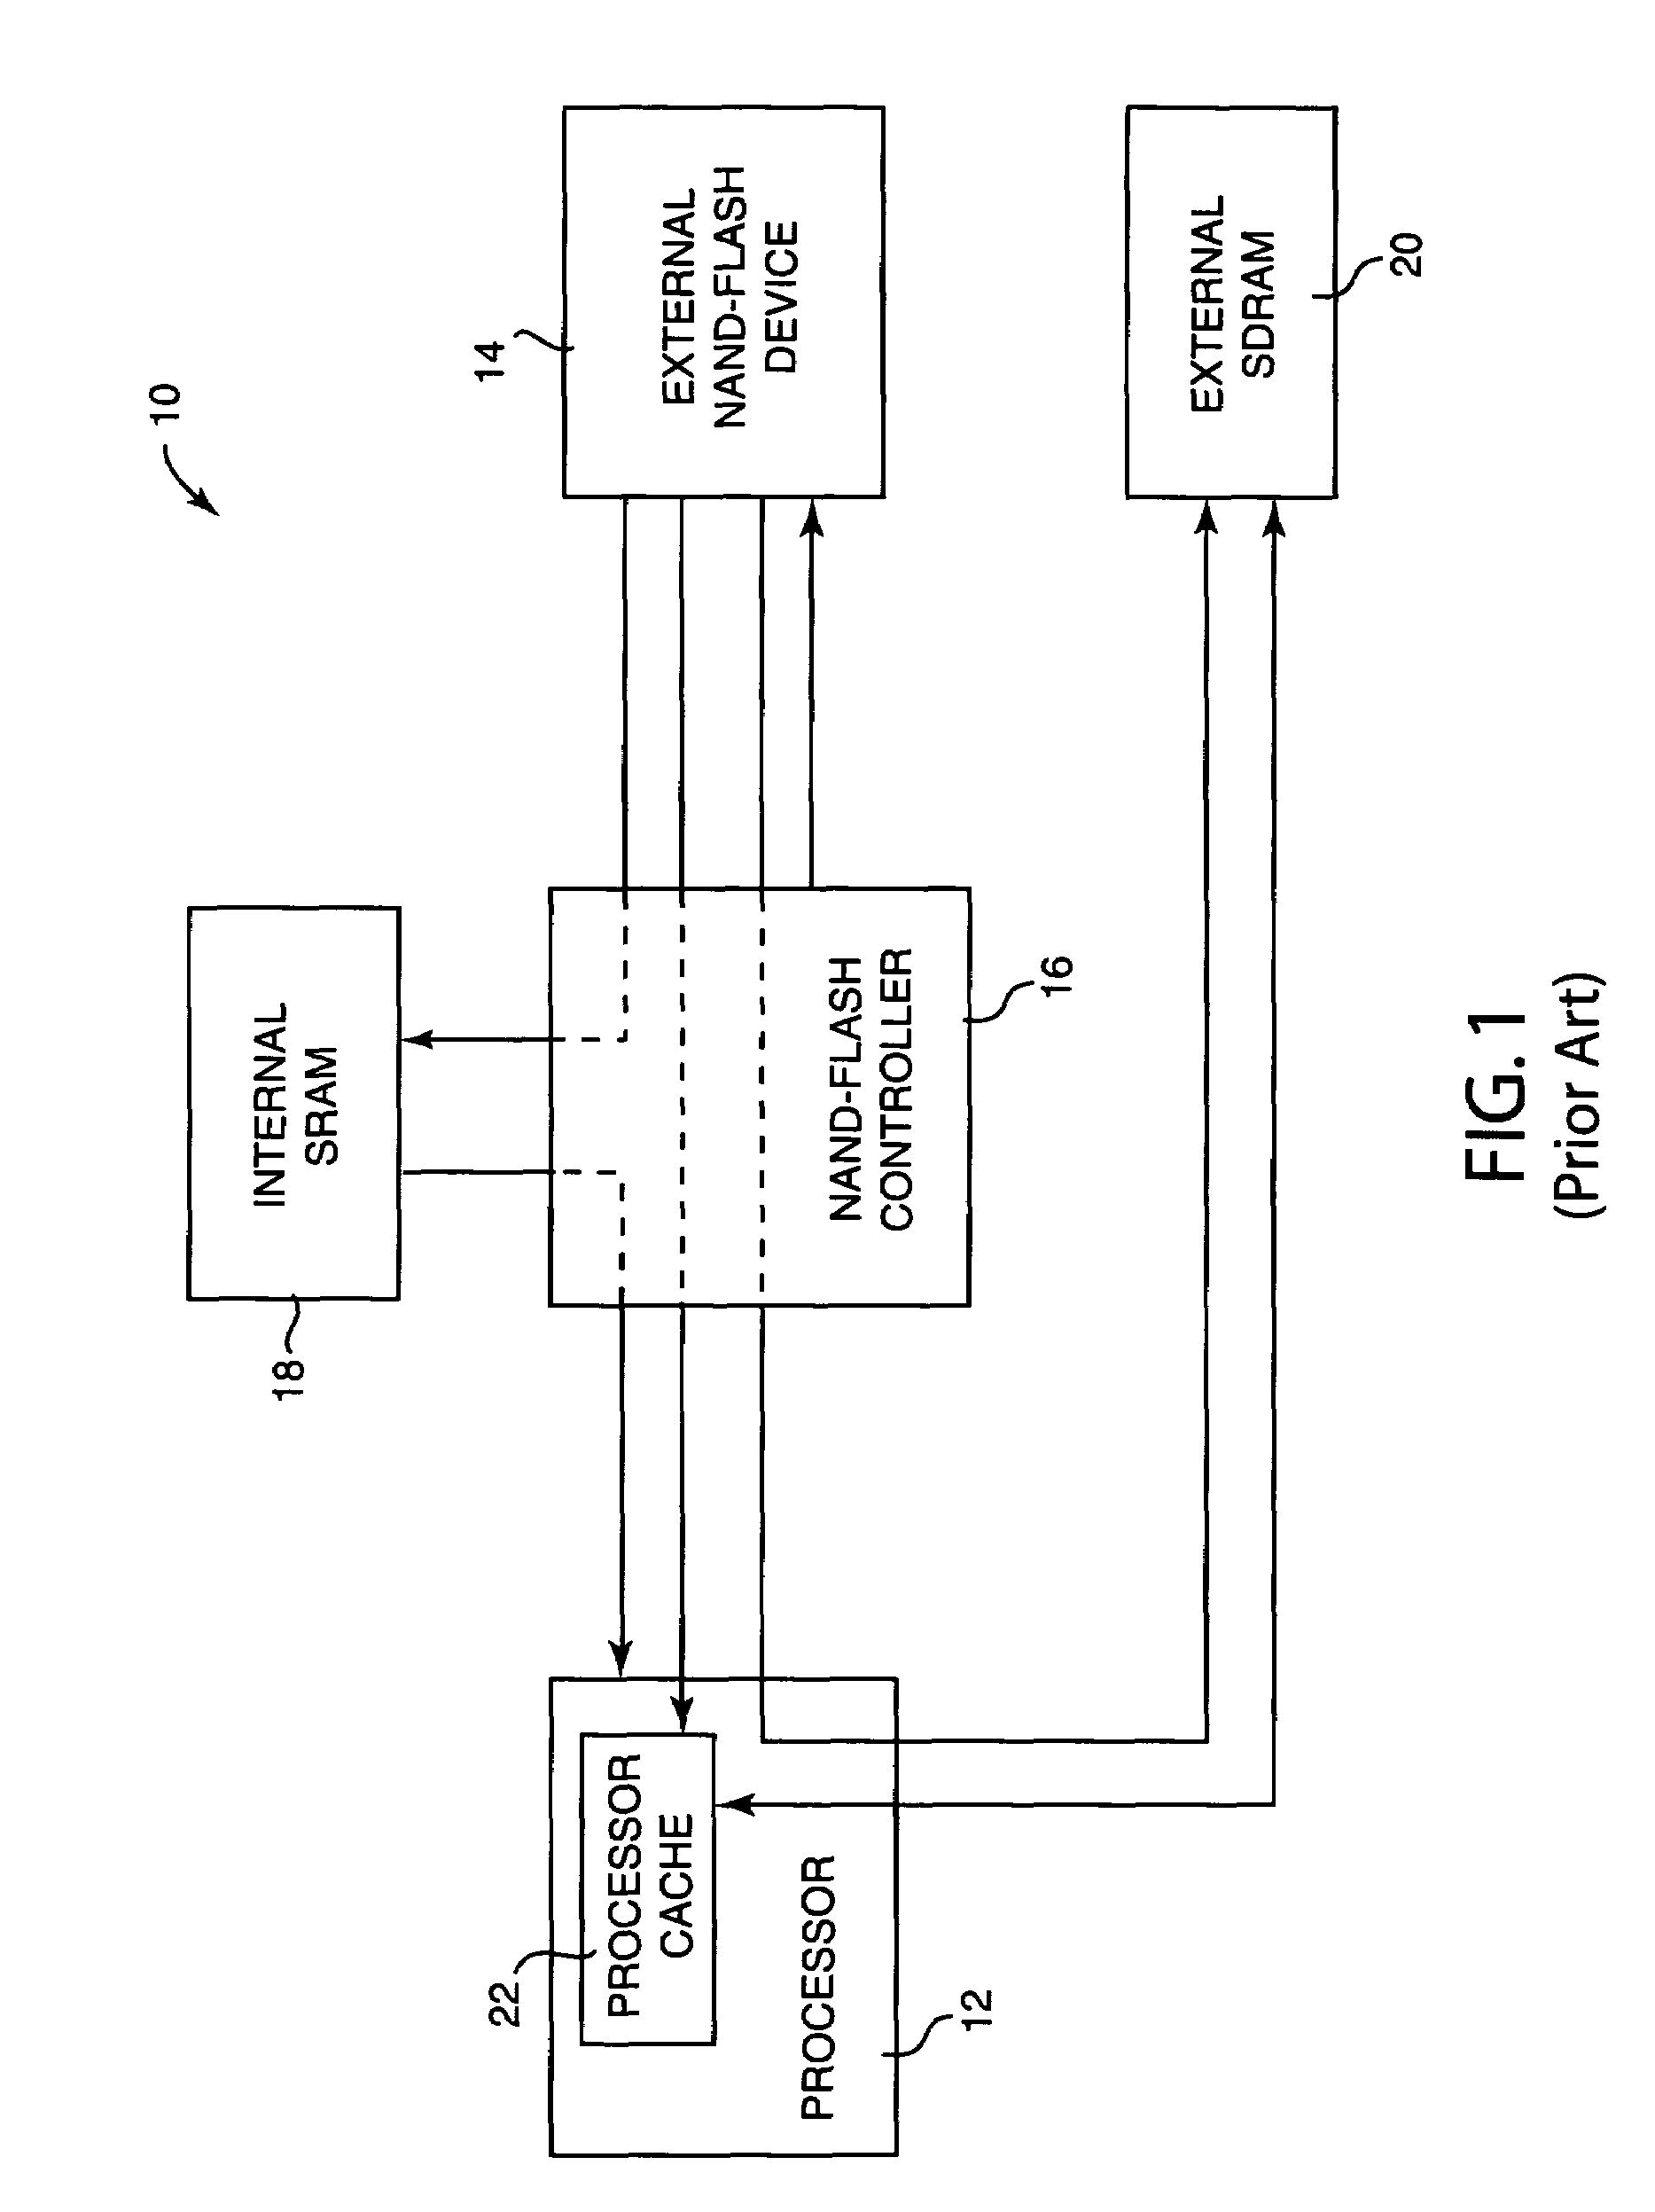 Method and system for loading processor boot code from serial flash memory